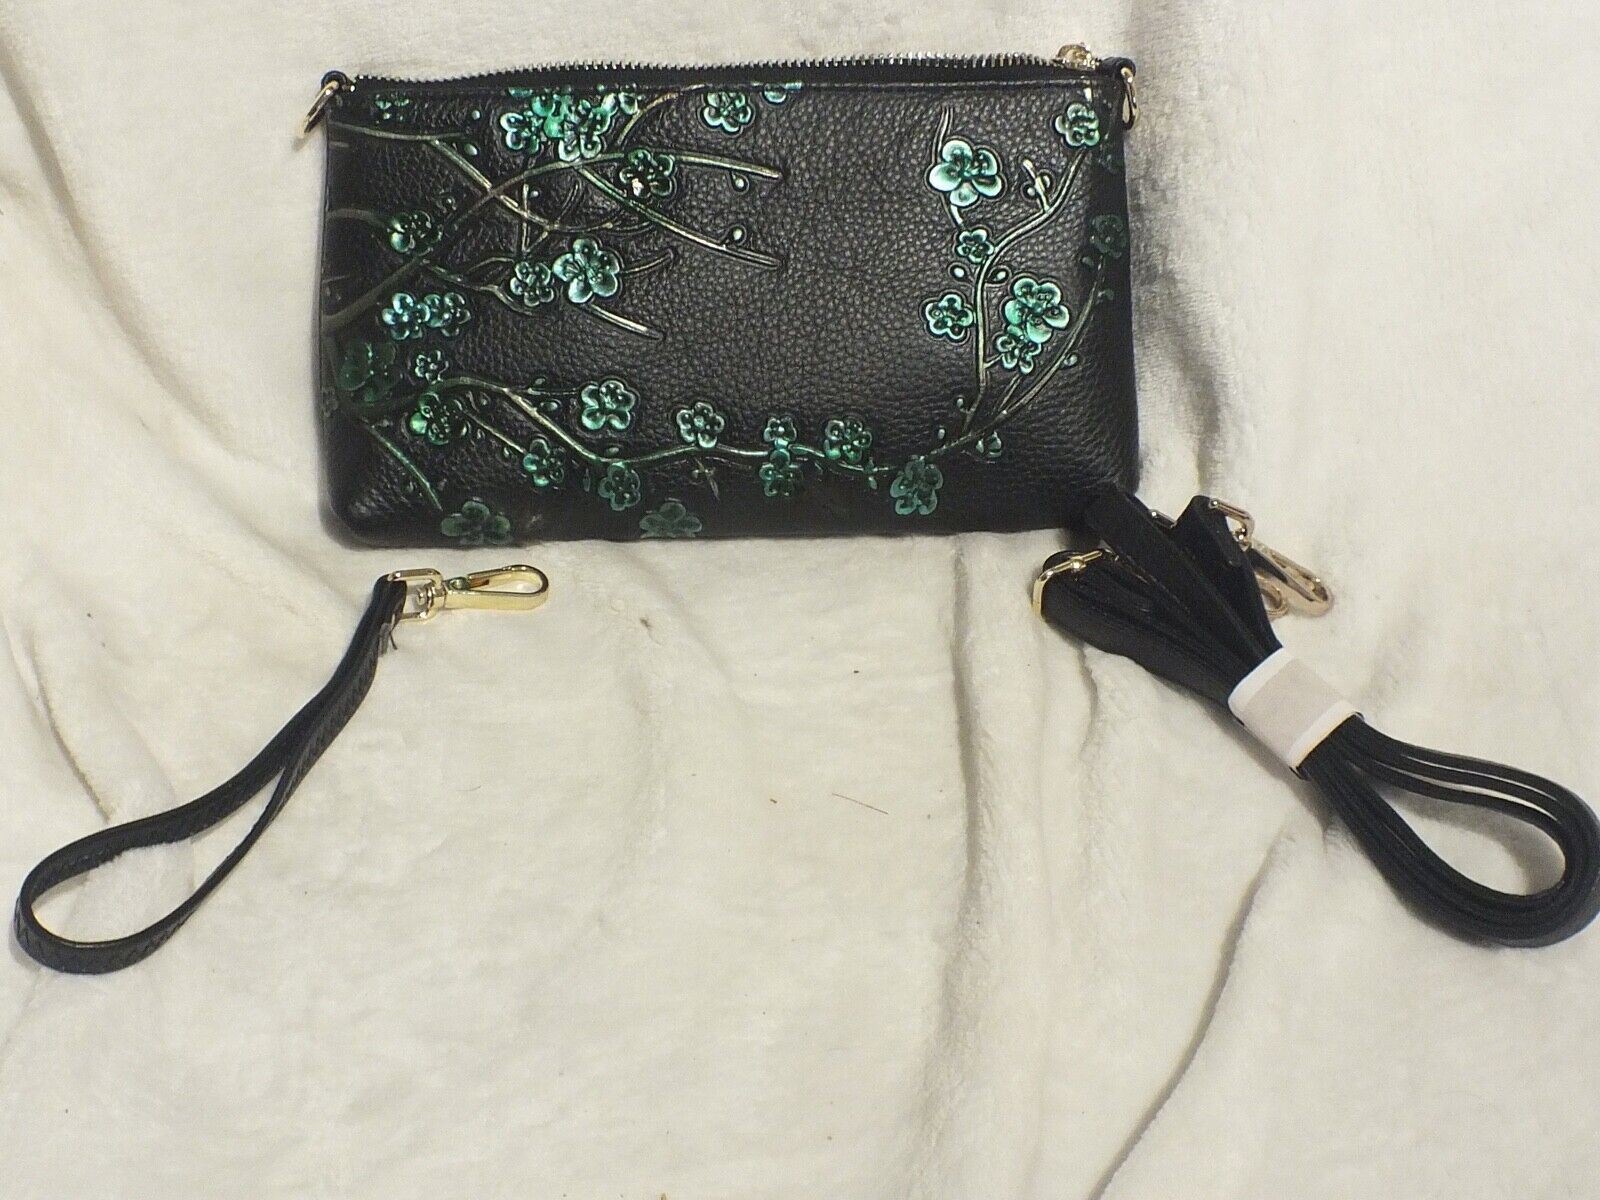 Serenade   beverly hills collection cross body bag  with Floral Patten